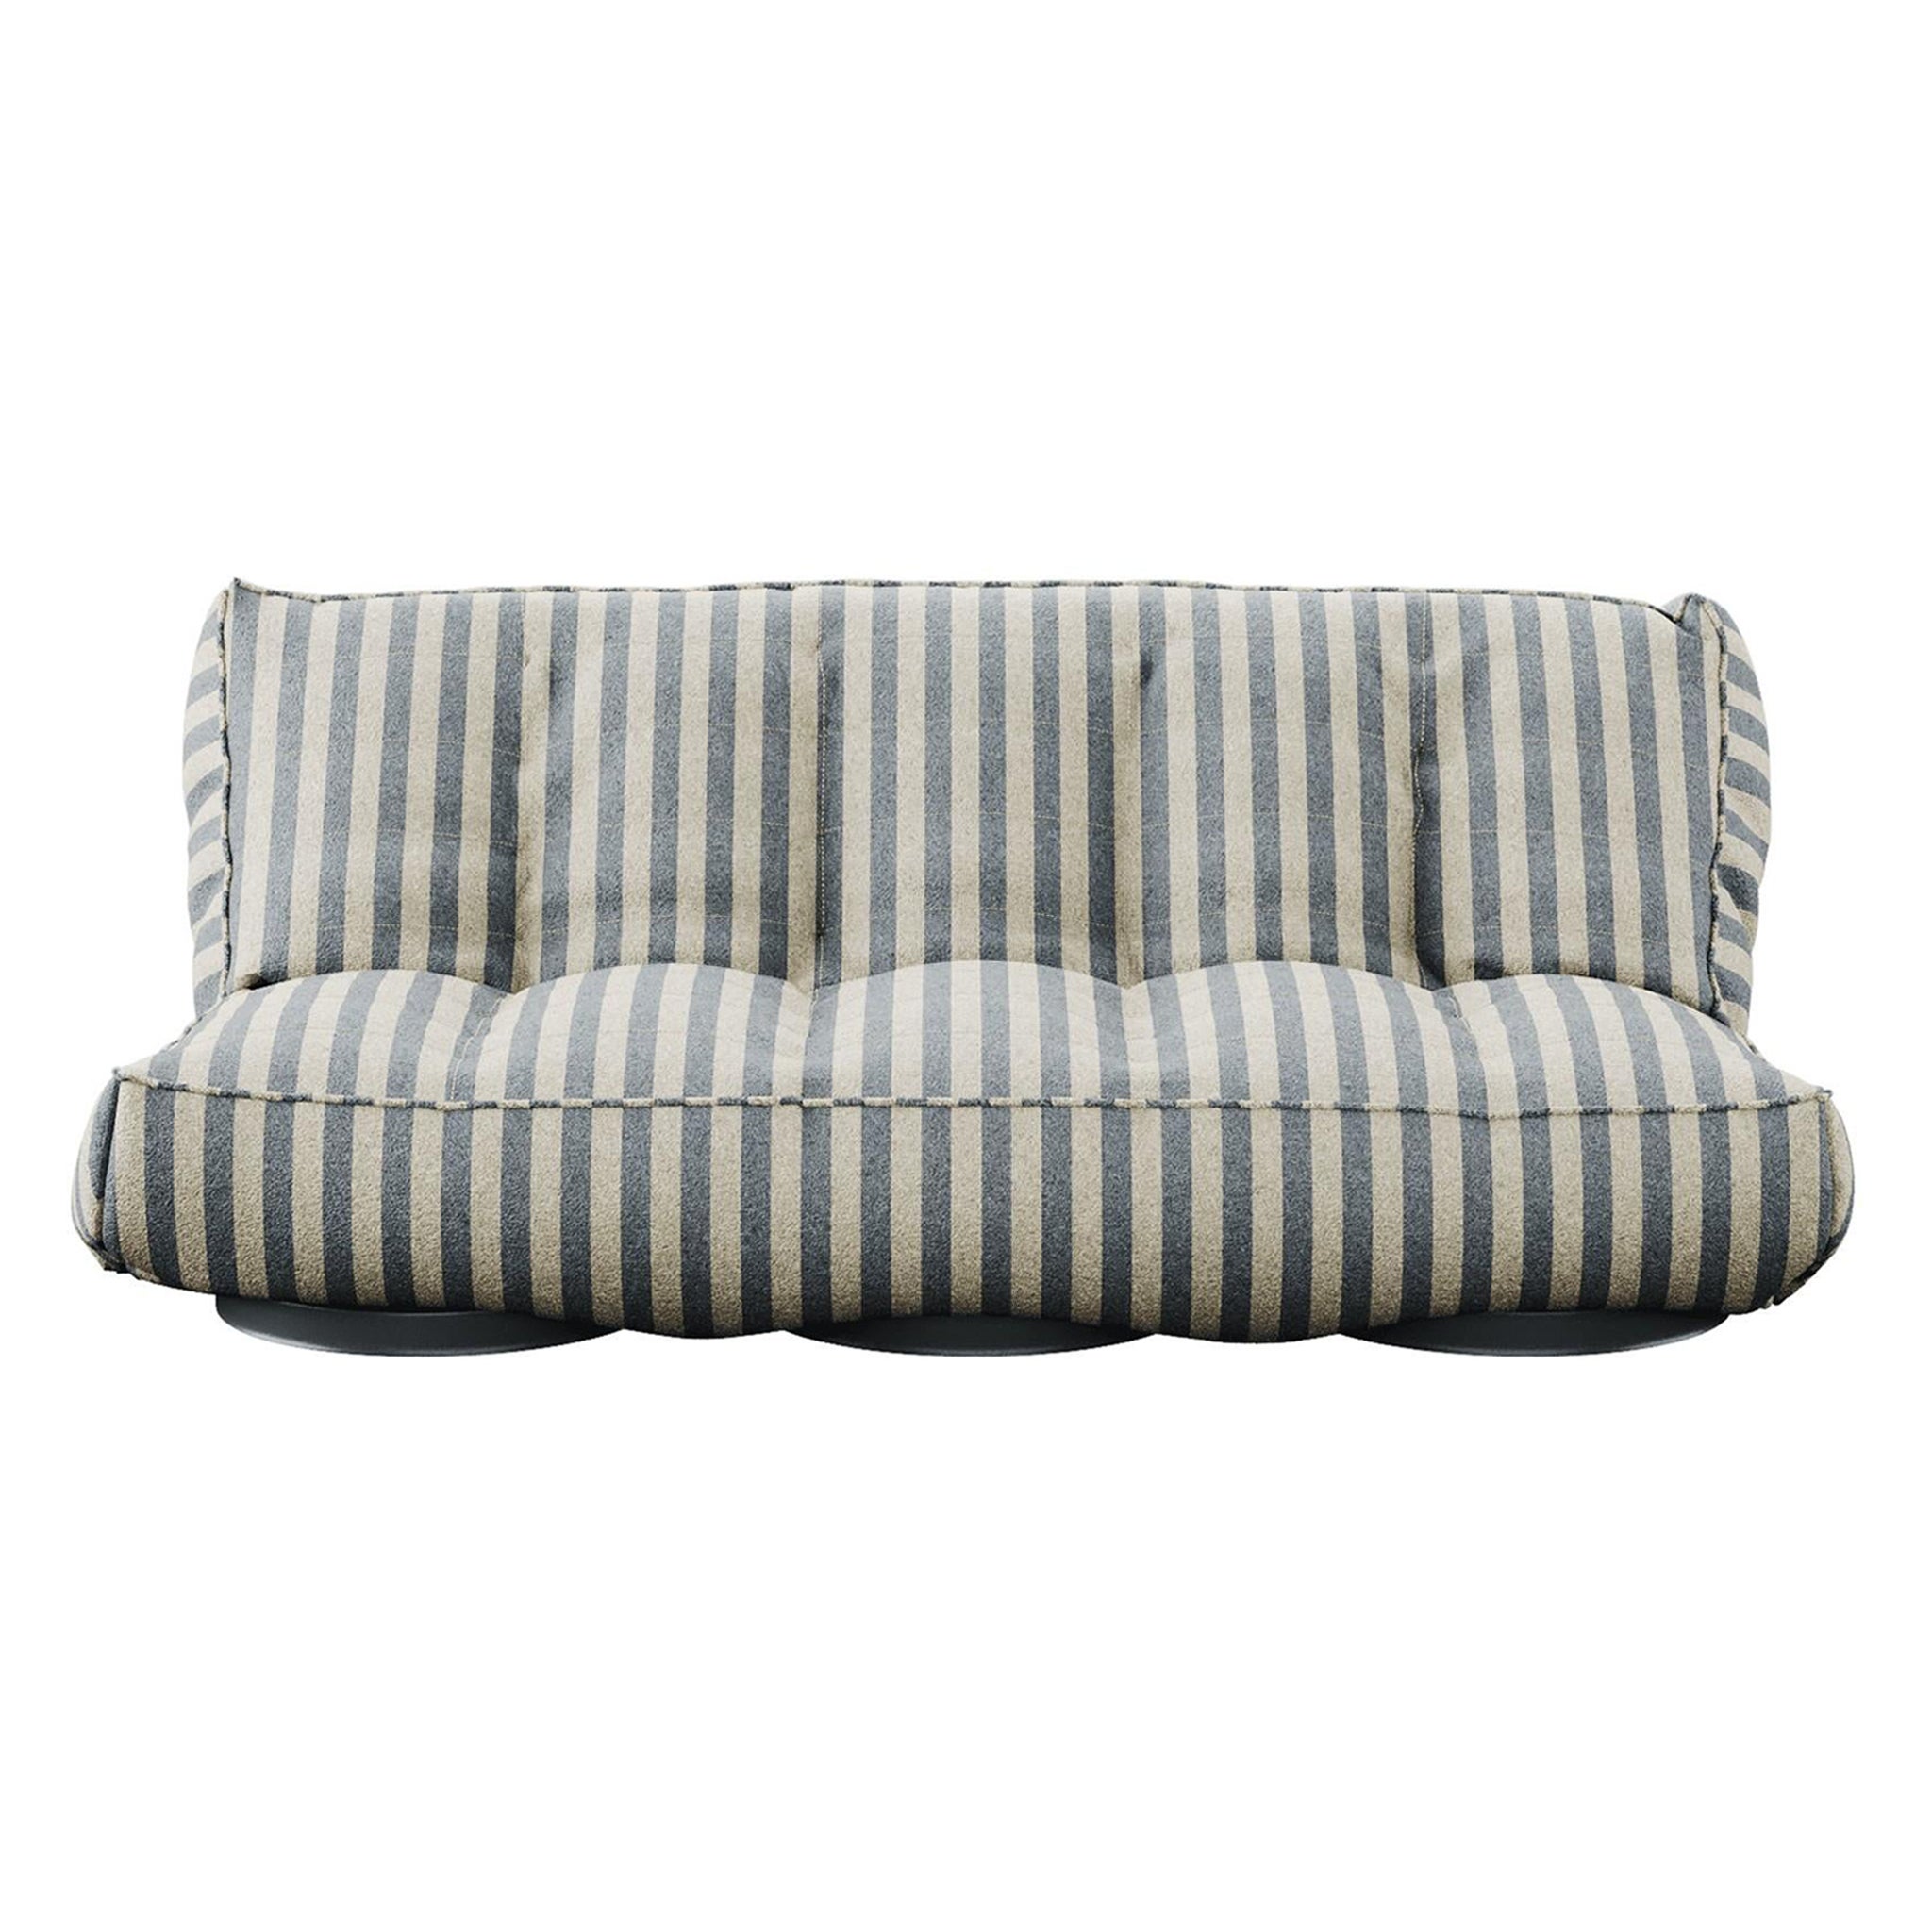 Modern Outdoor Sofa Folding Daybed Upholstered in Outdoor Blue Striped Fabric For Sale